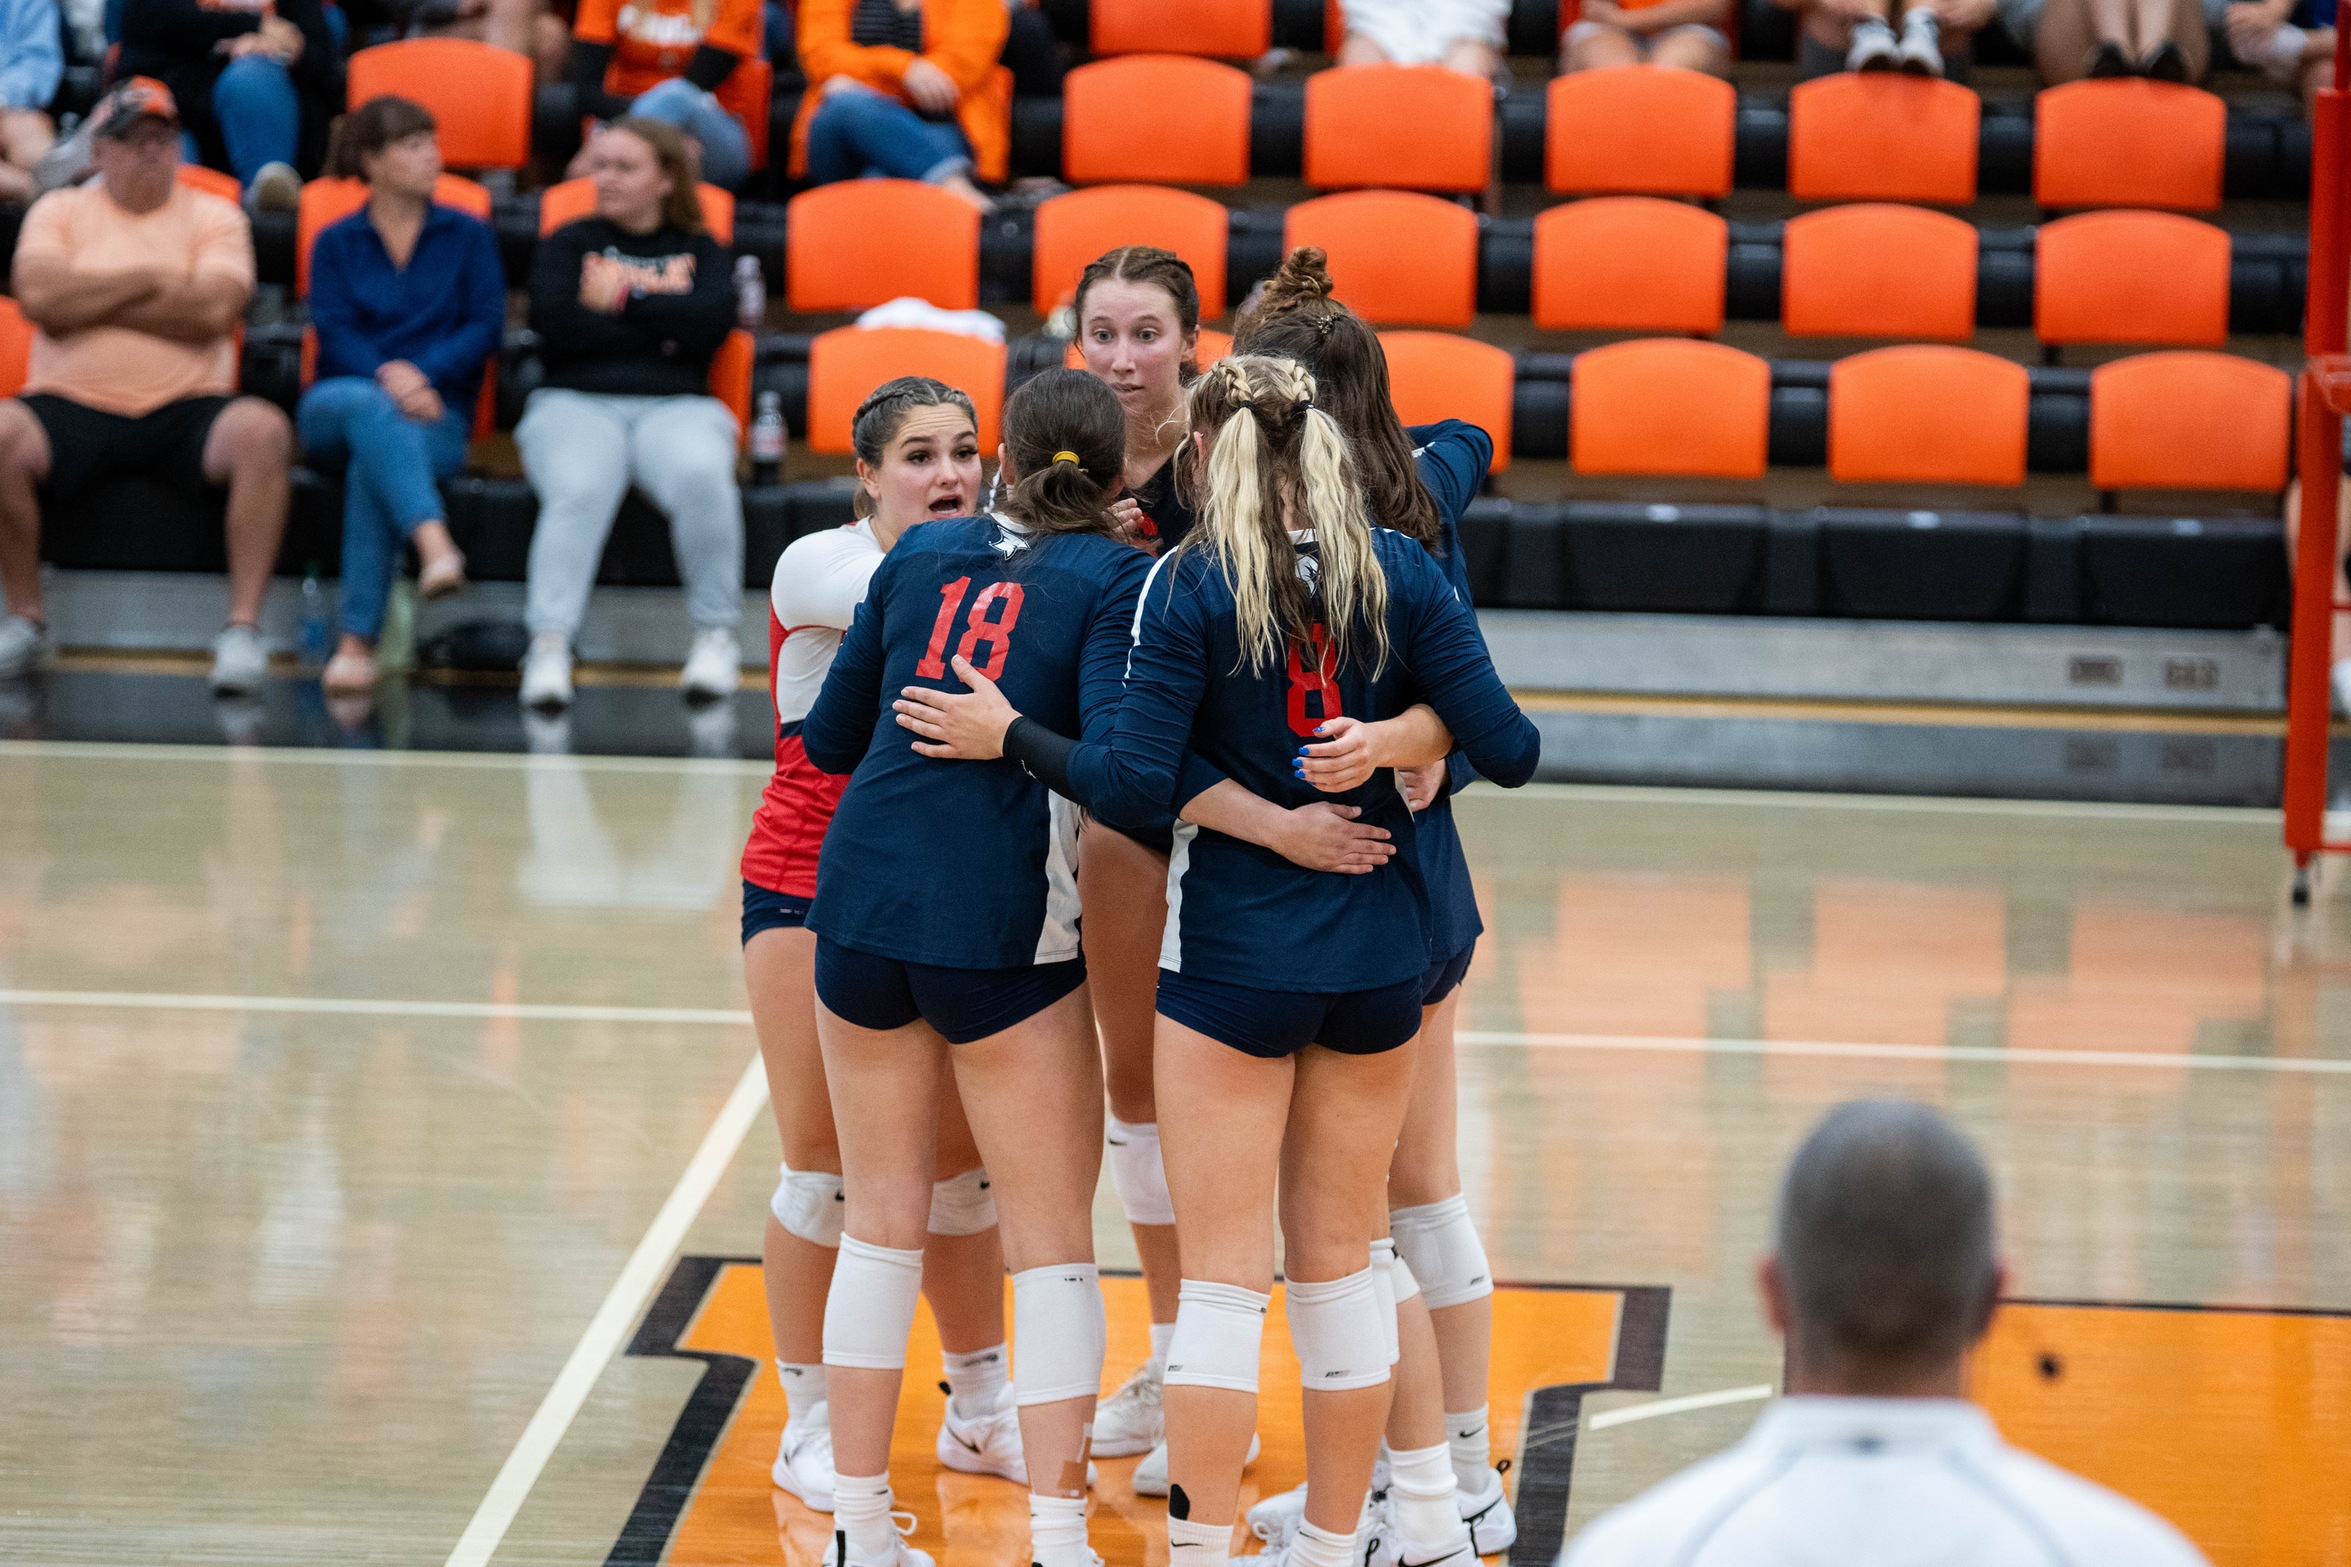 Cardinal Volleyball Suffer Loss in Home Opener